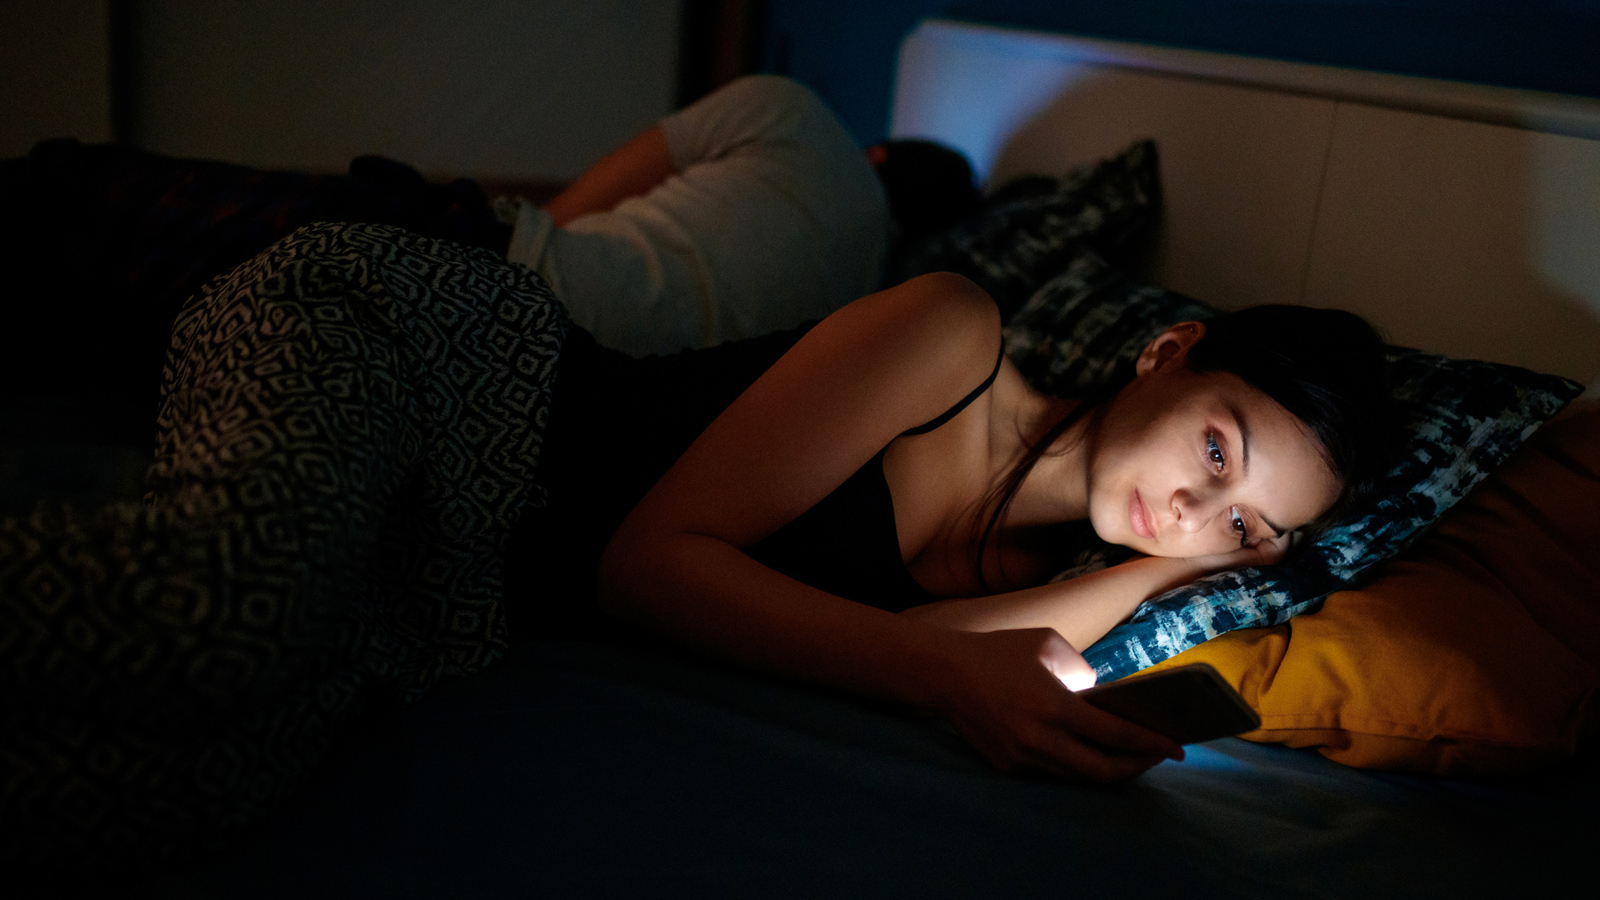 A woman looks at her phone in bed 